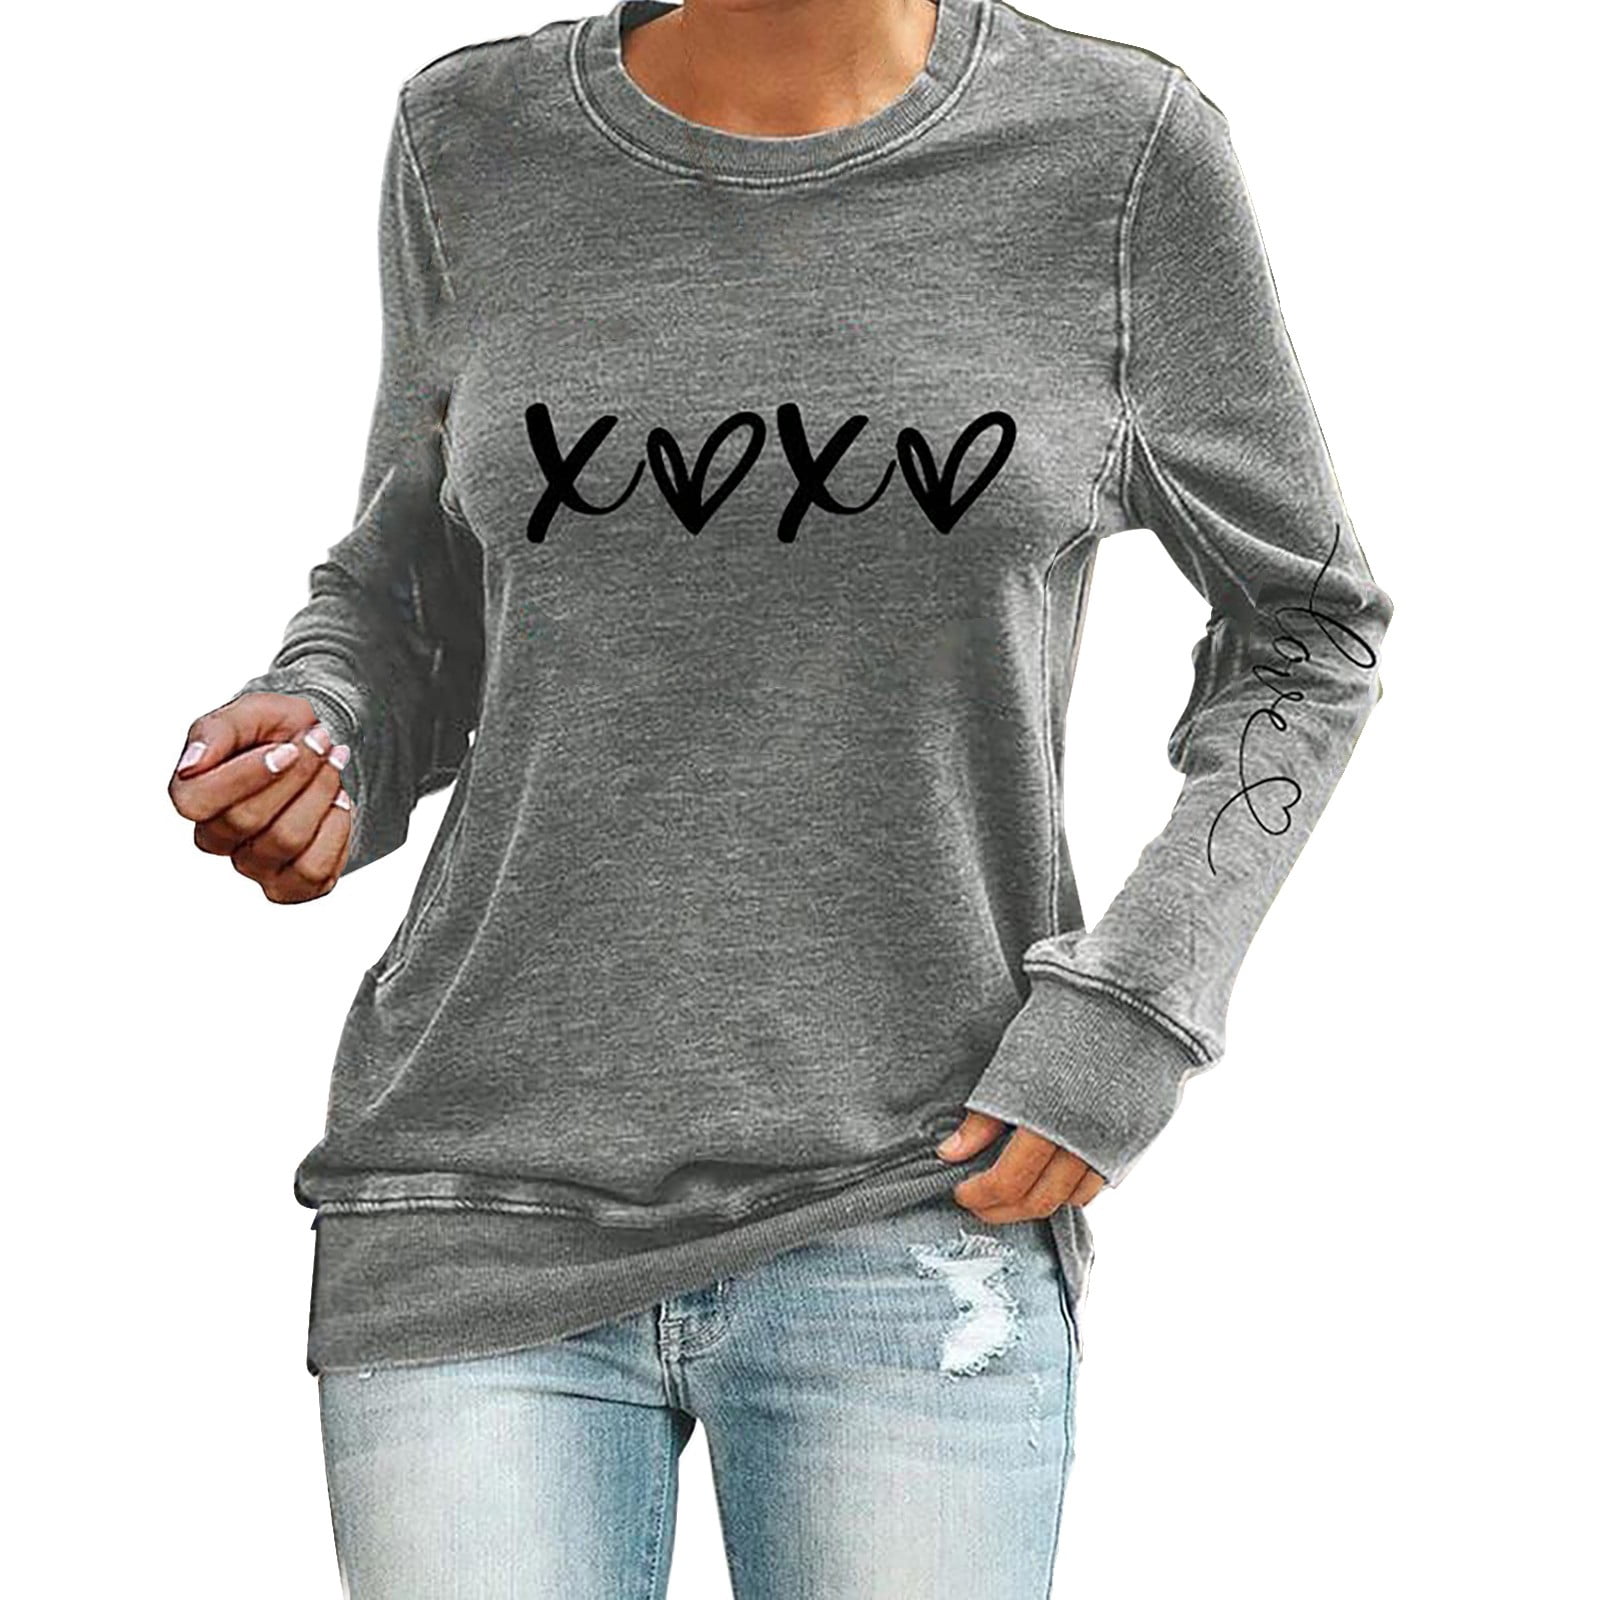 Wefuesd Valentines Day Shirts Women, Valentines Day Outfit Women, Heart ...